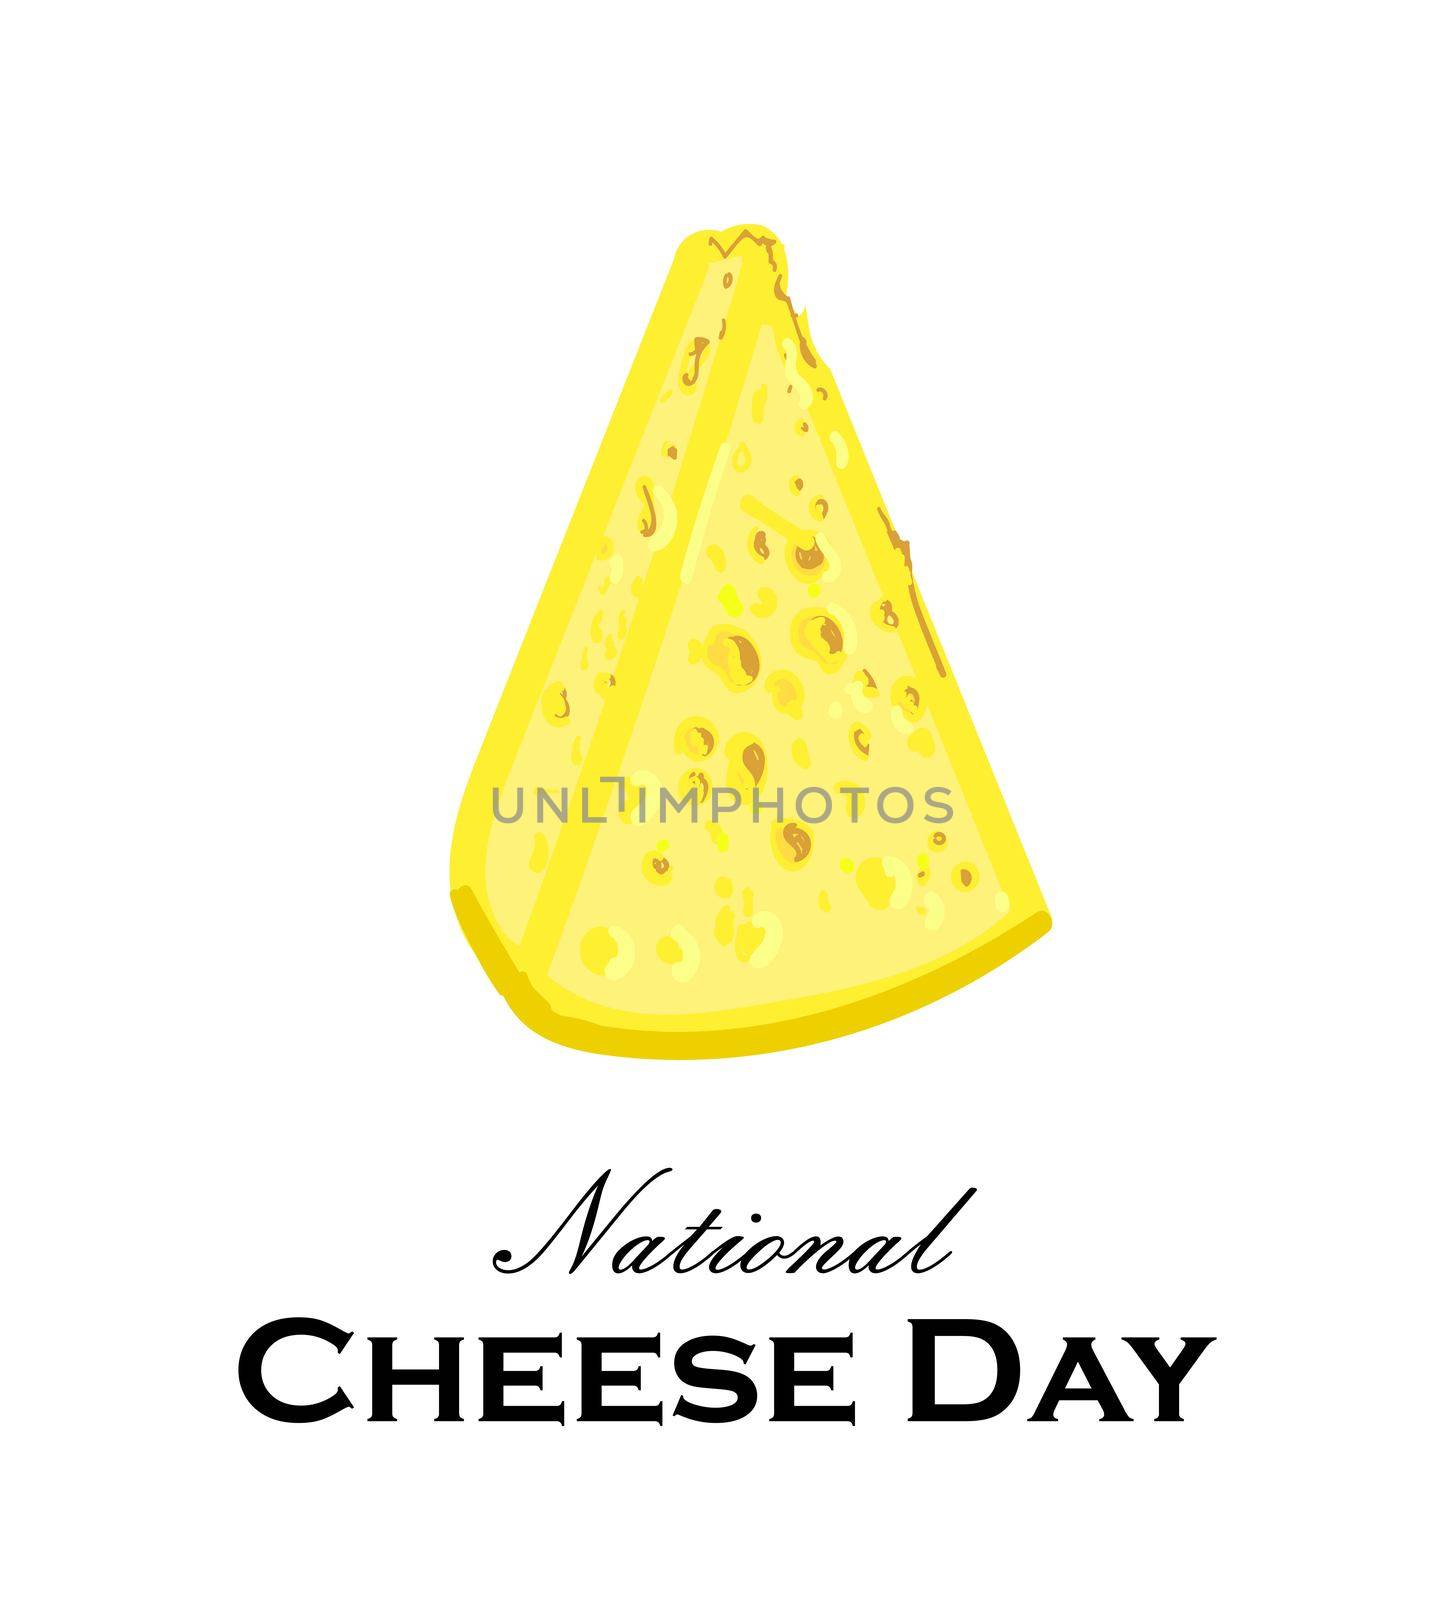 National Cheese Day. Piece of cheese on a white background. Greeting card or poster. The yellow product is dairy.